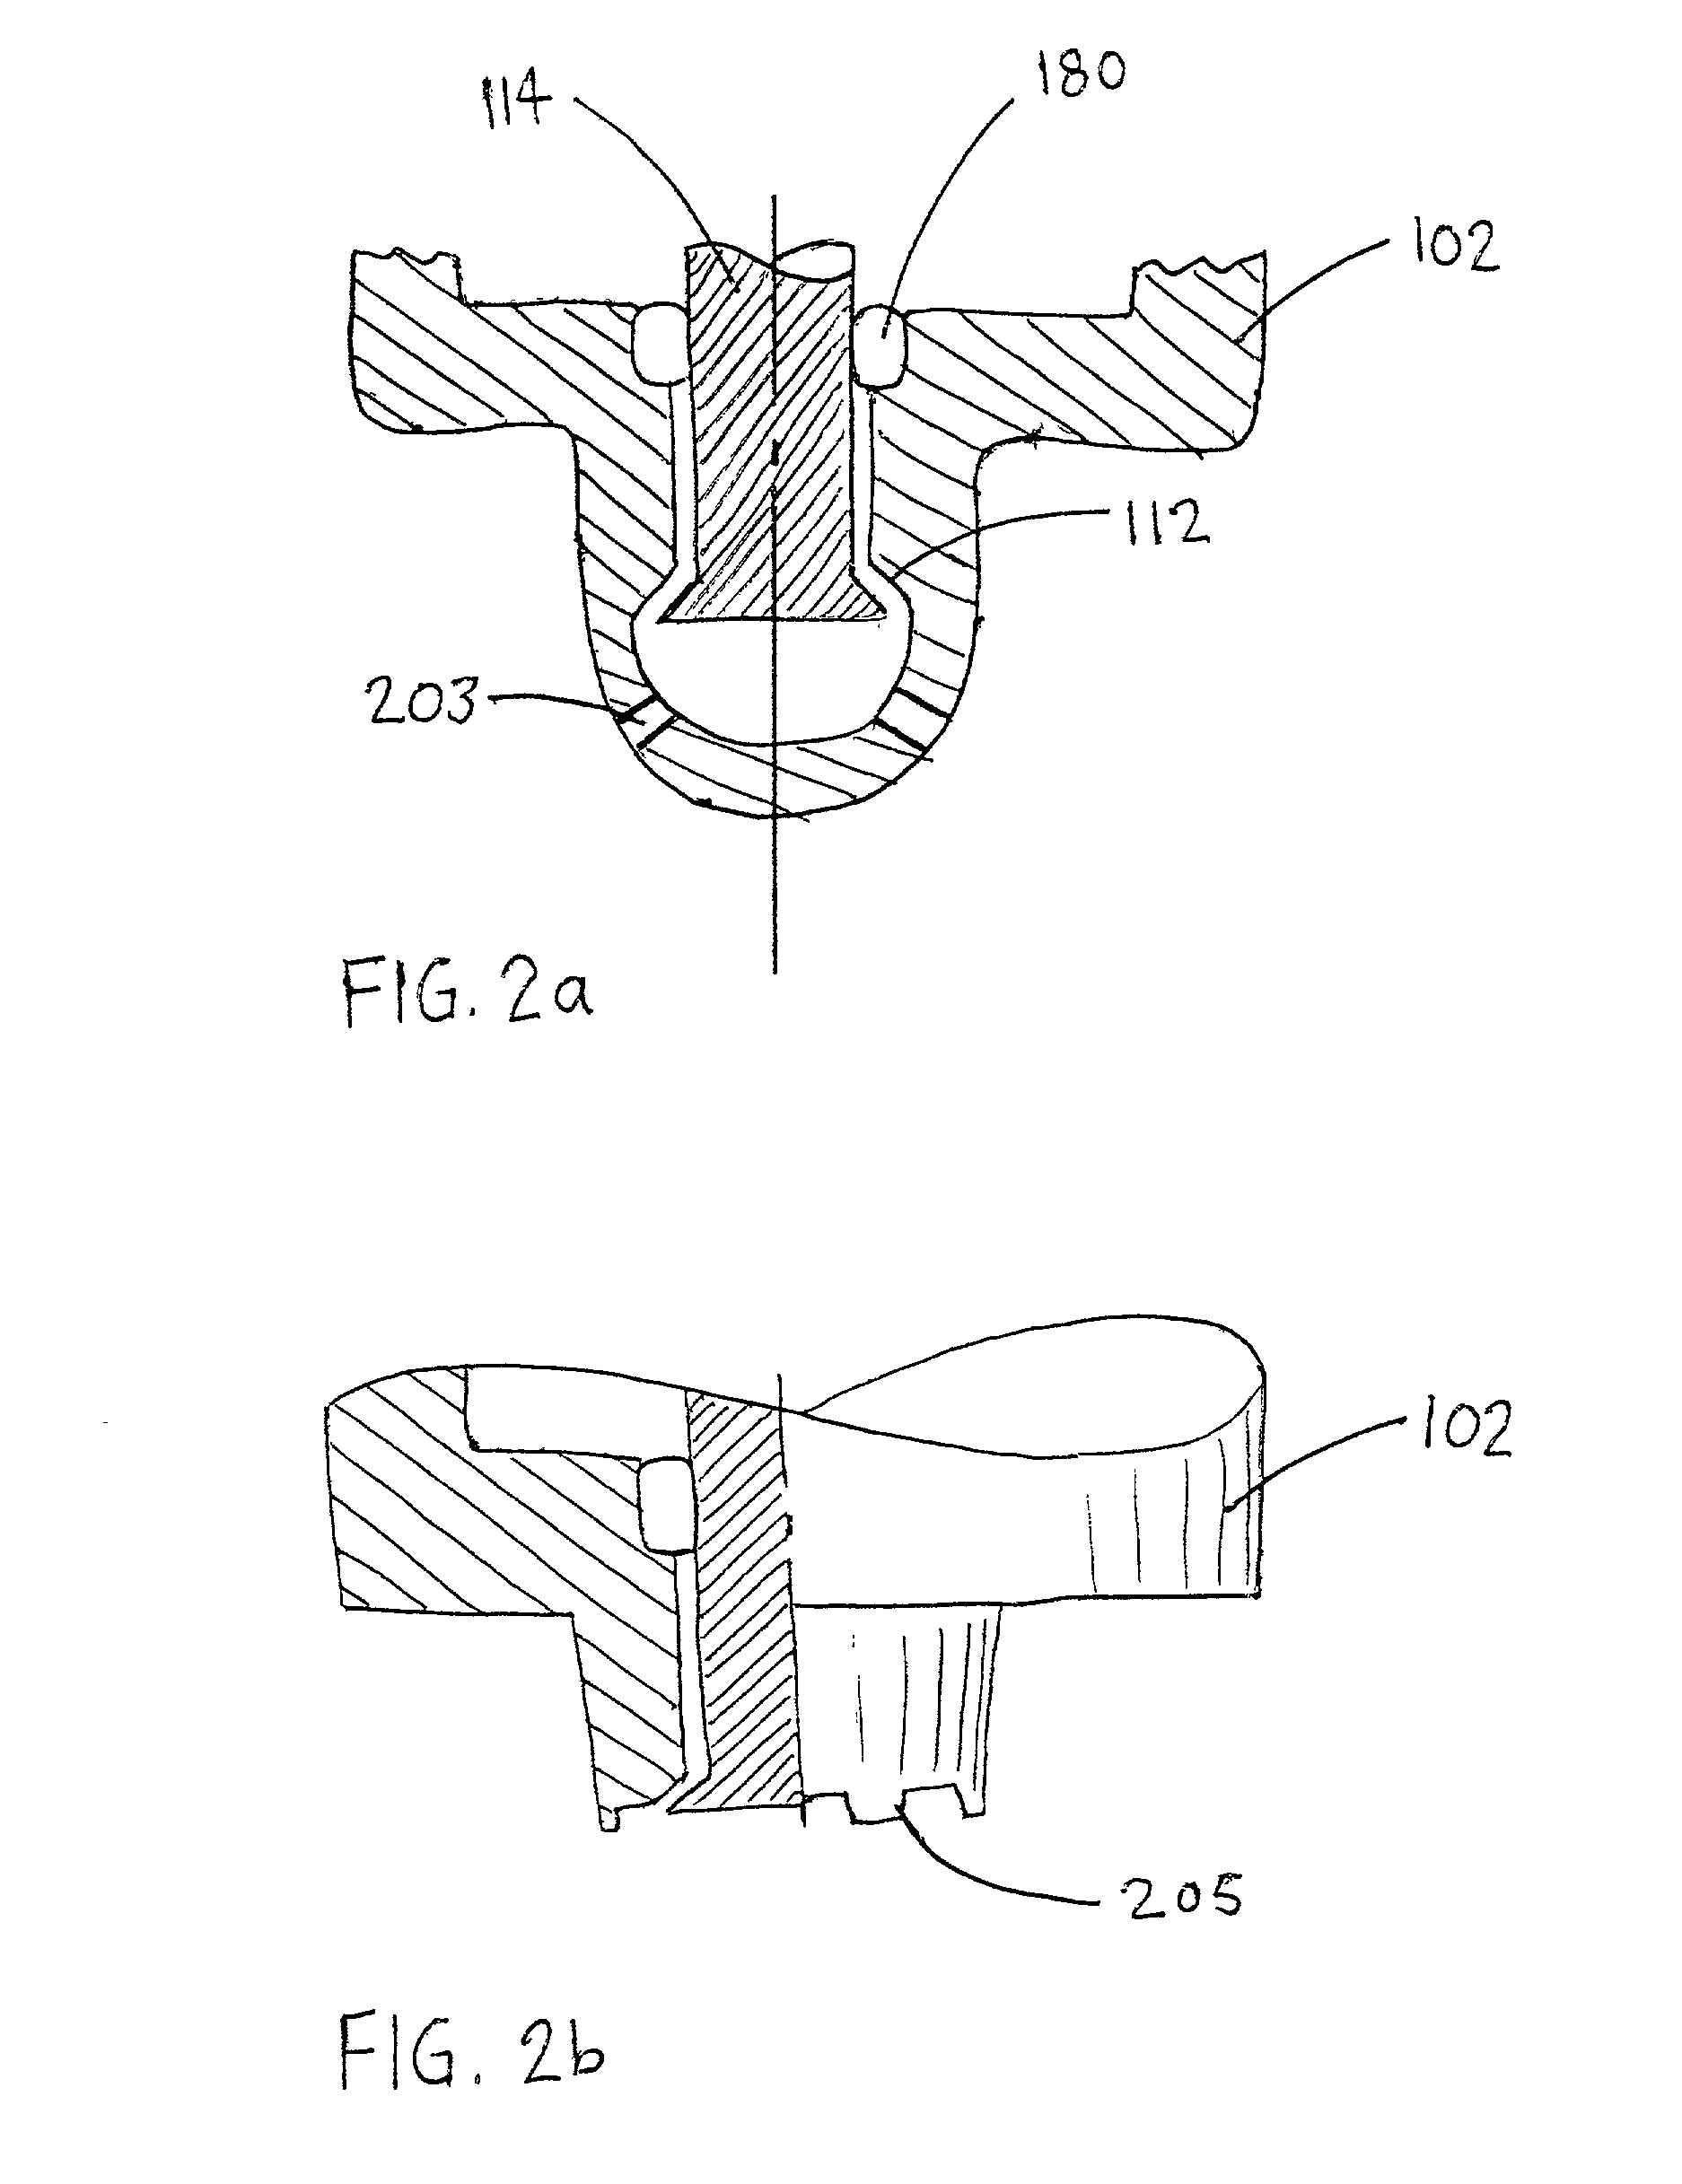 Directly actuated injection valve